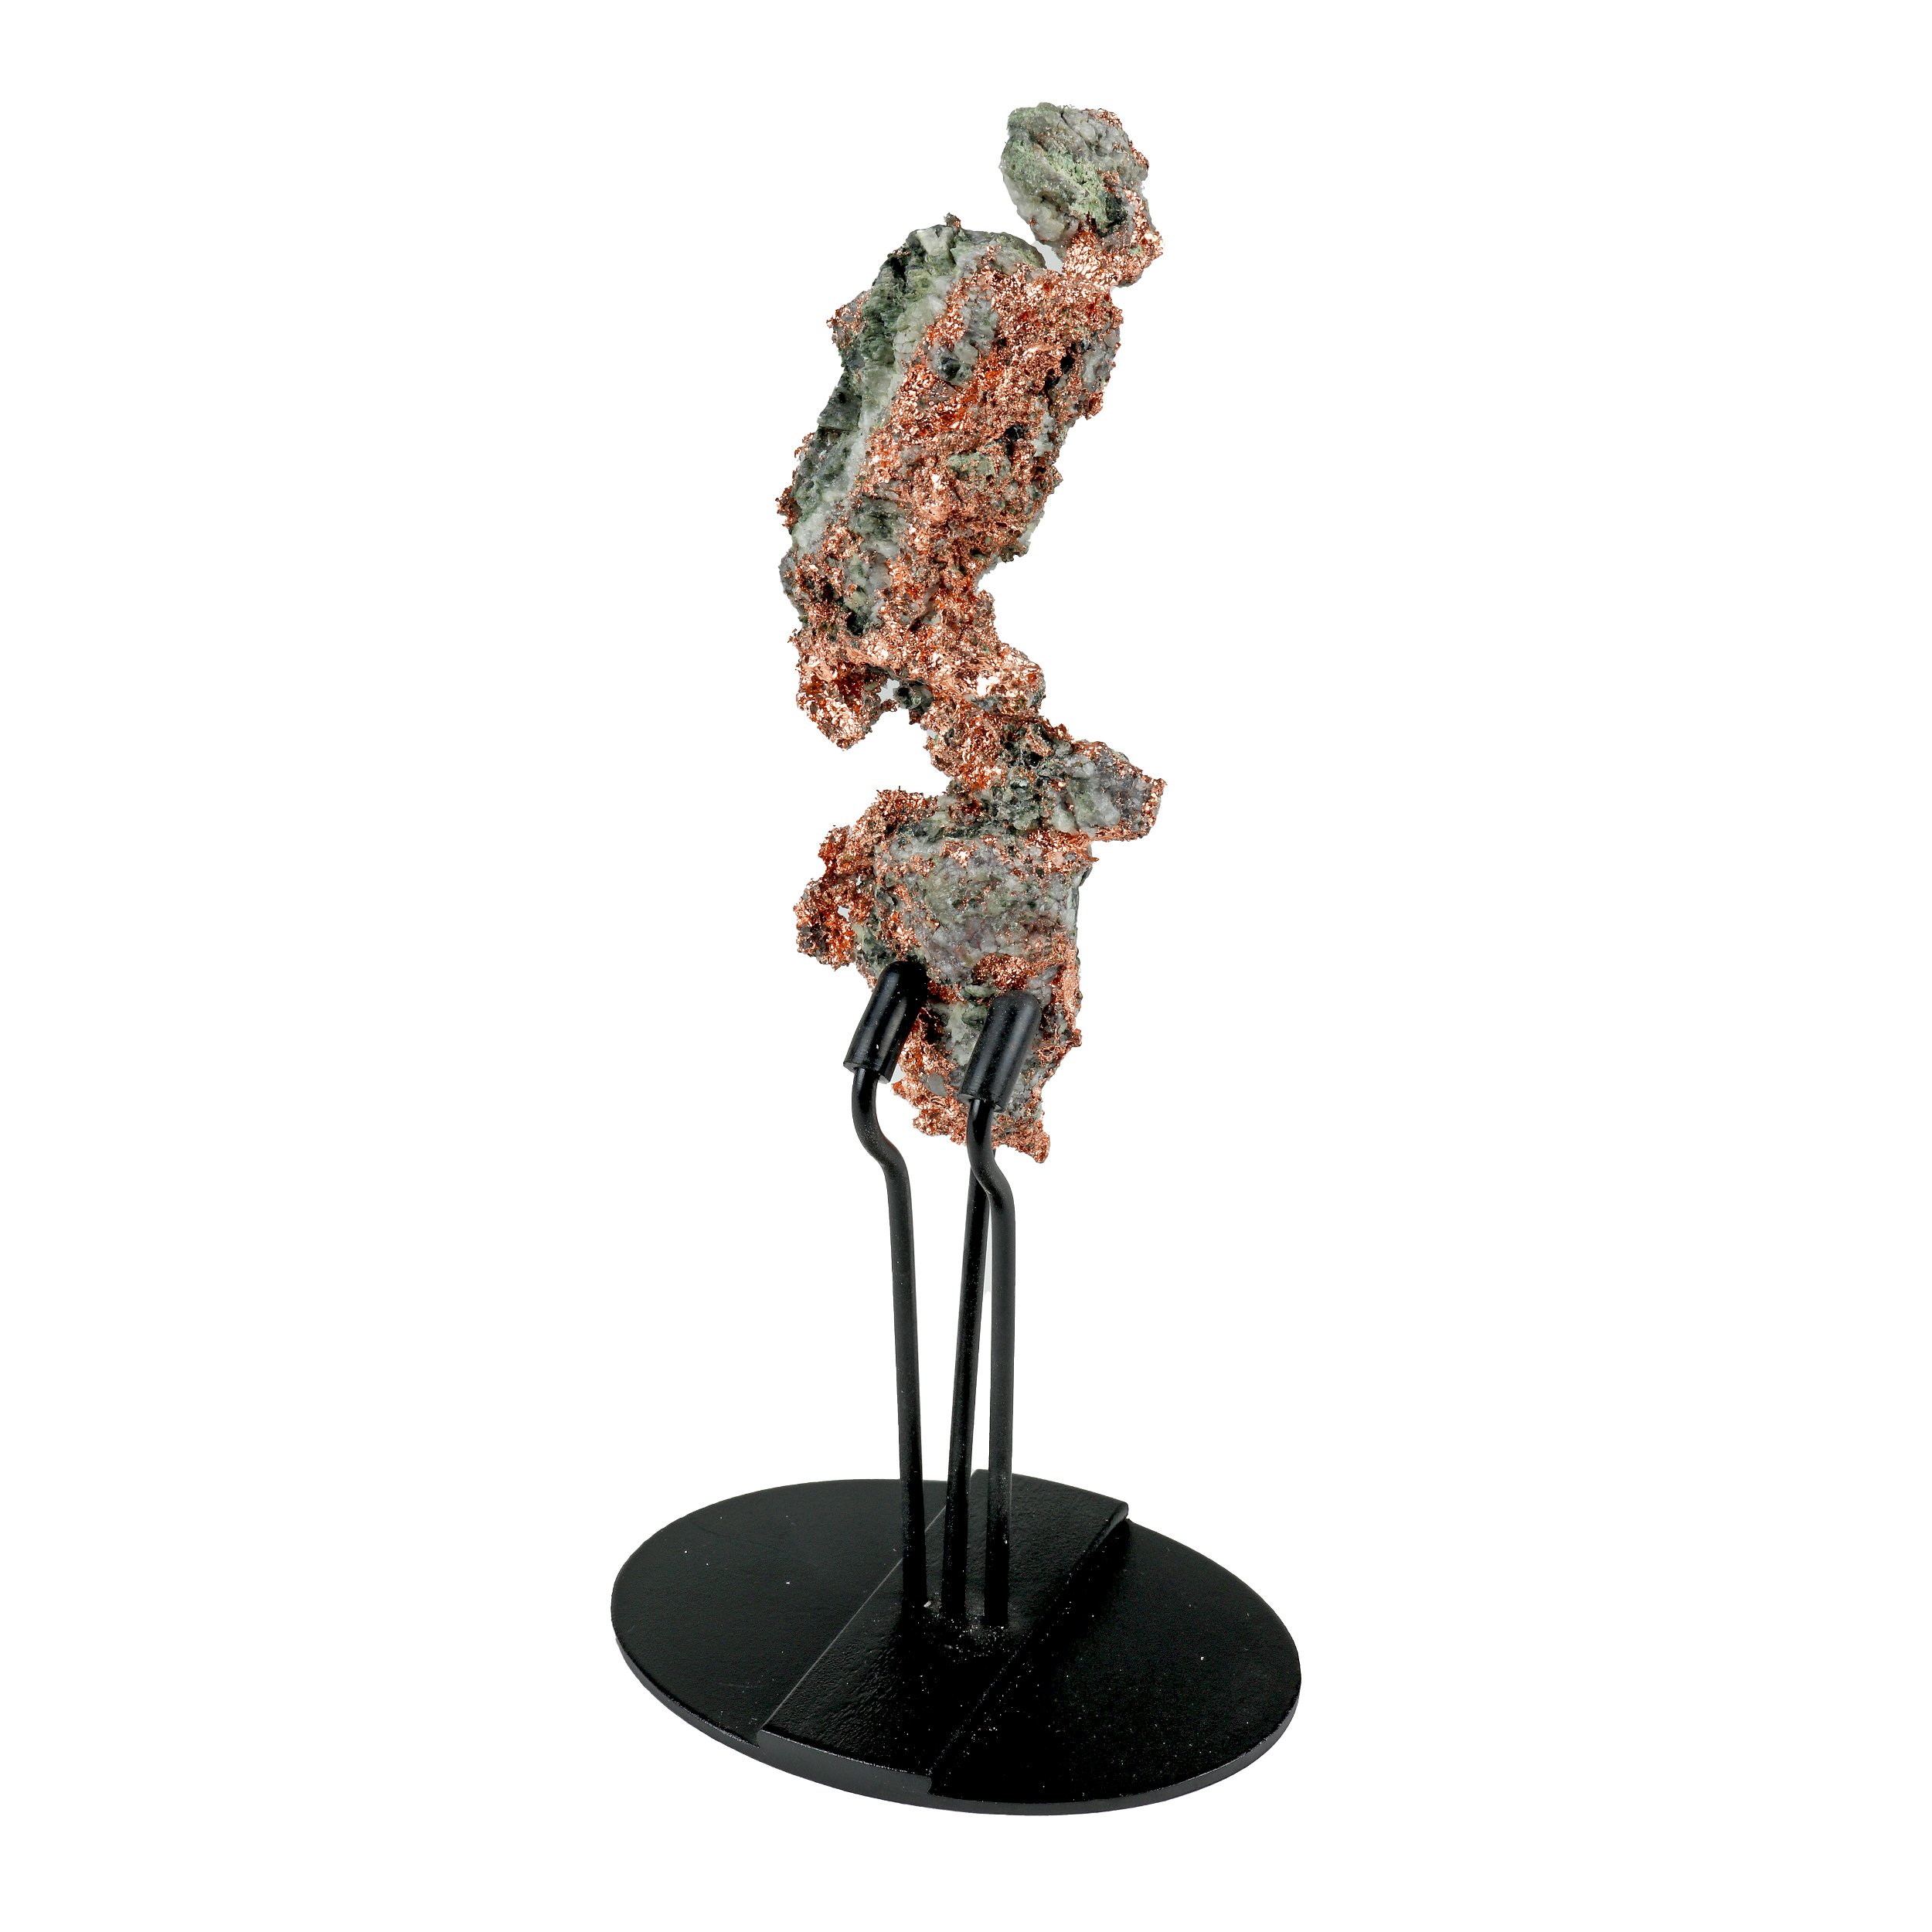 Michigan Native Copper In 3 - Pronged Tension Fit Stand With Crystalization On Surface